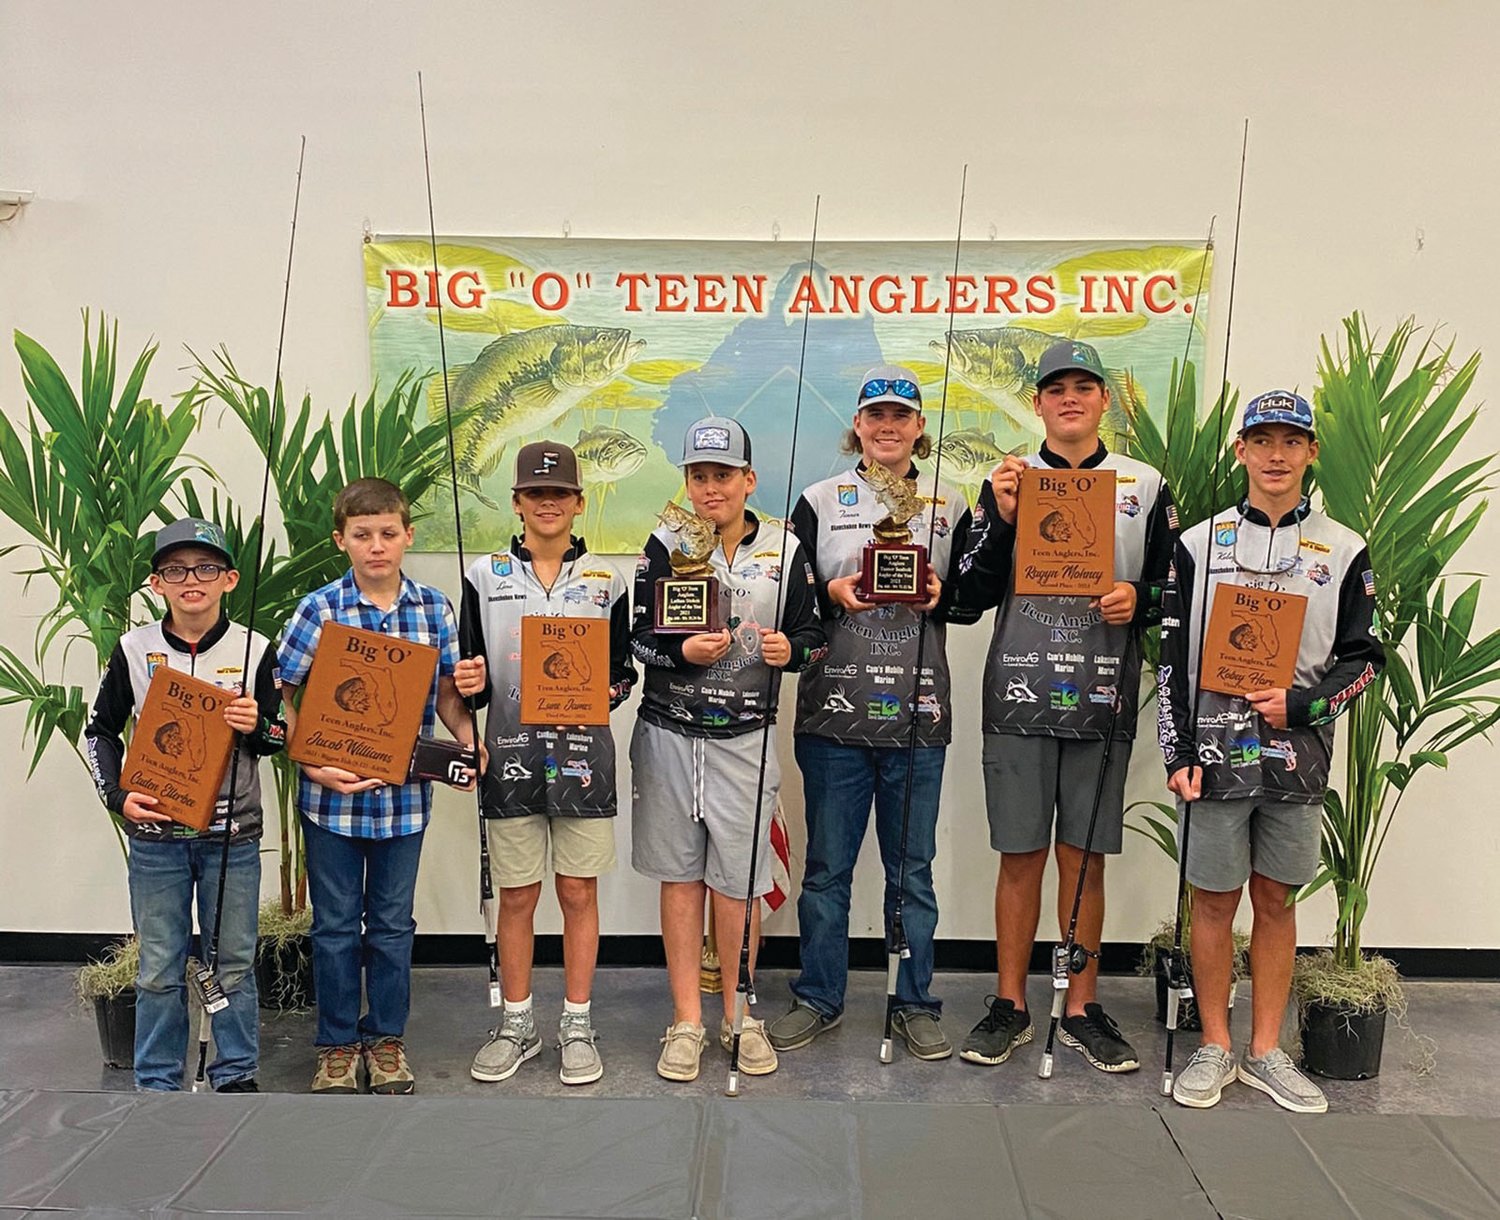 Big O Teen Anglers with their awards pictured left to right: Caden Ellerbee, Jacob Williams, Lane James, Lathan Stokes, Tanner Seabolt, Ragyn Mohney and Kobey Hare.